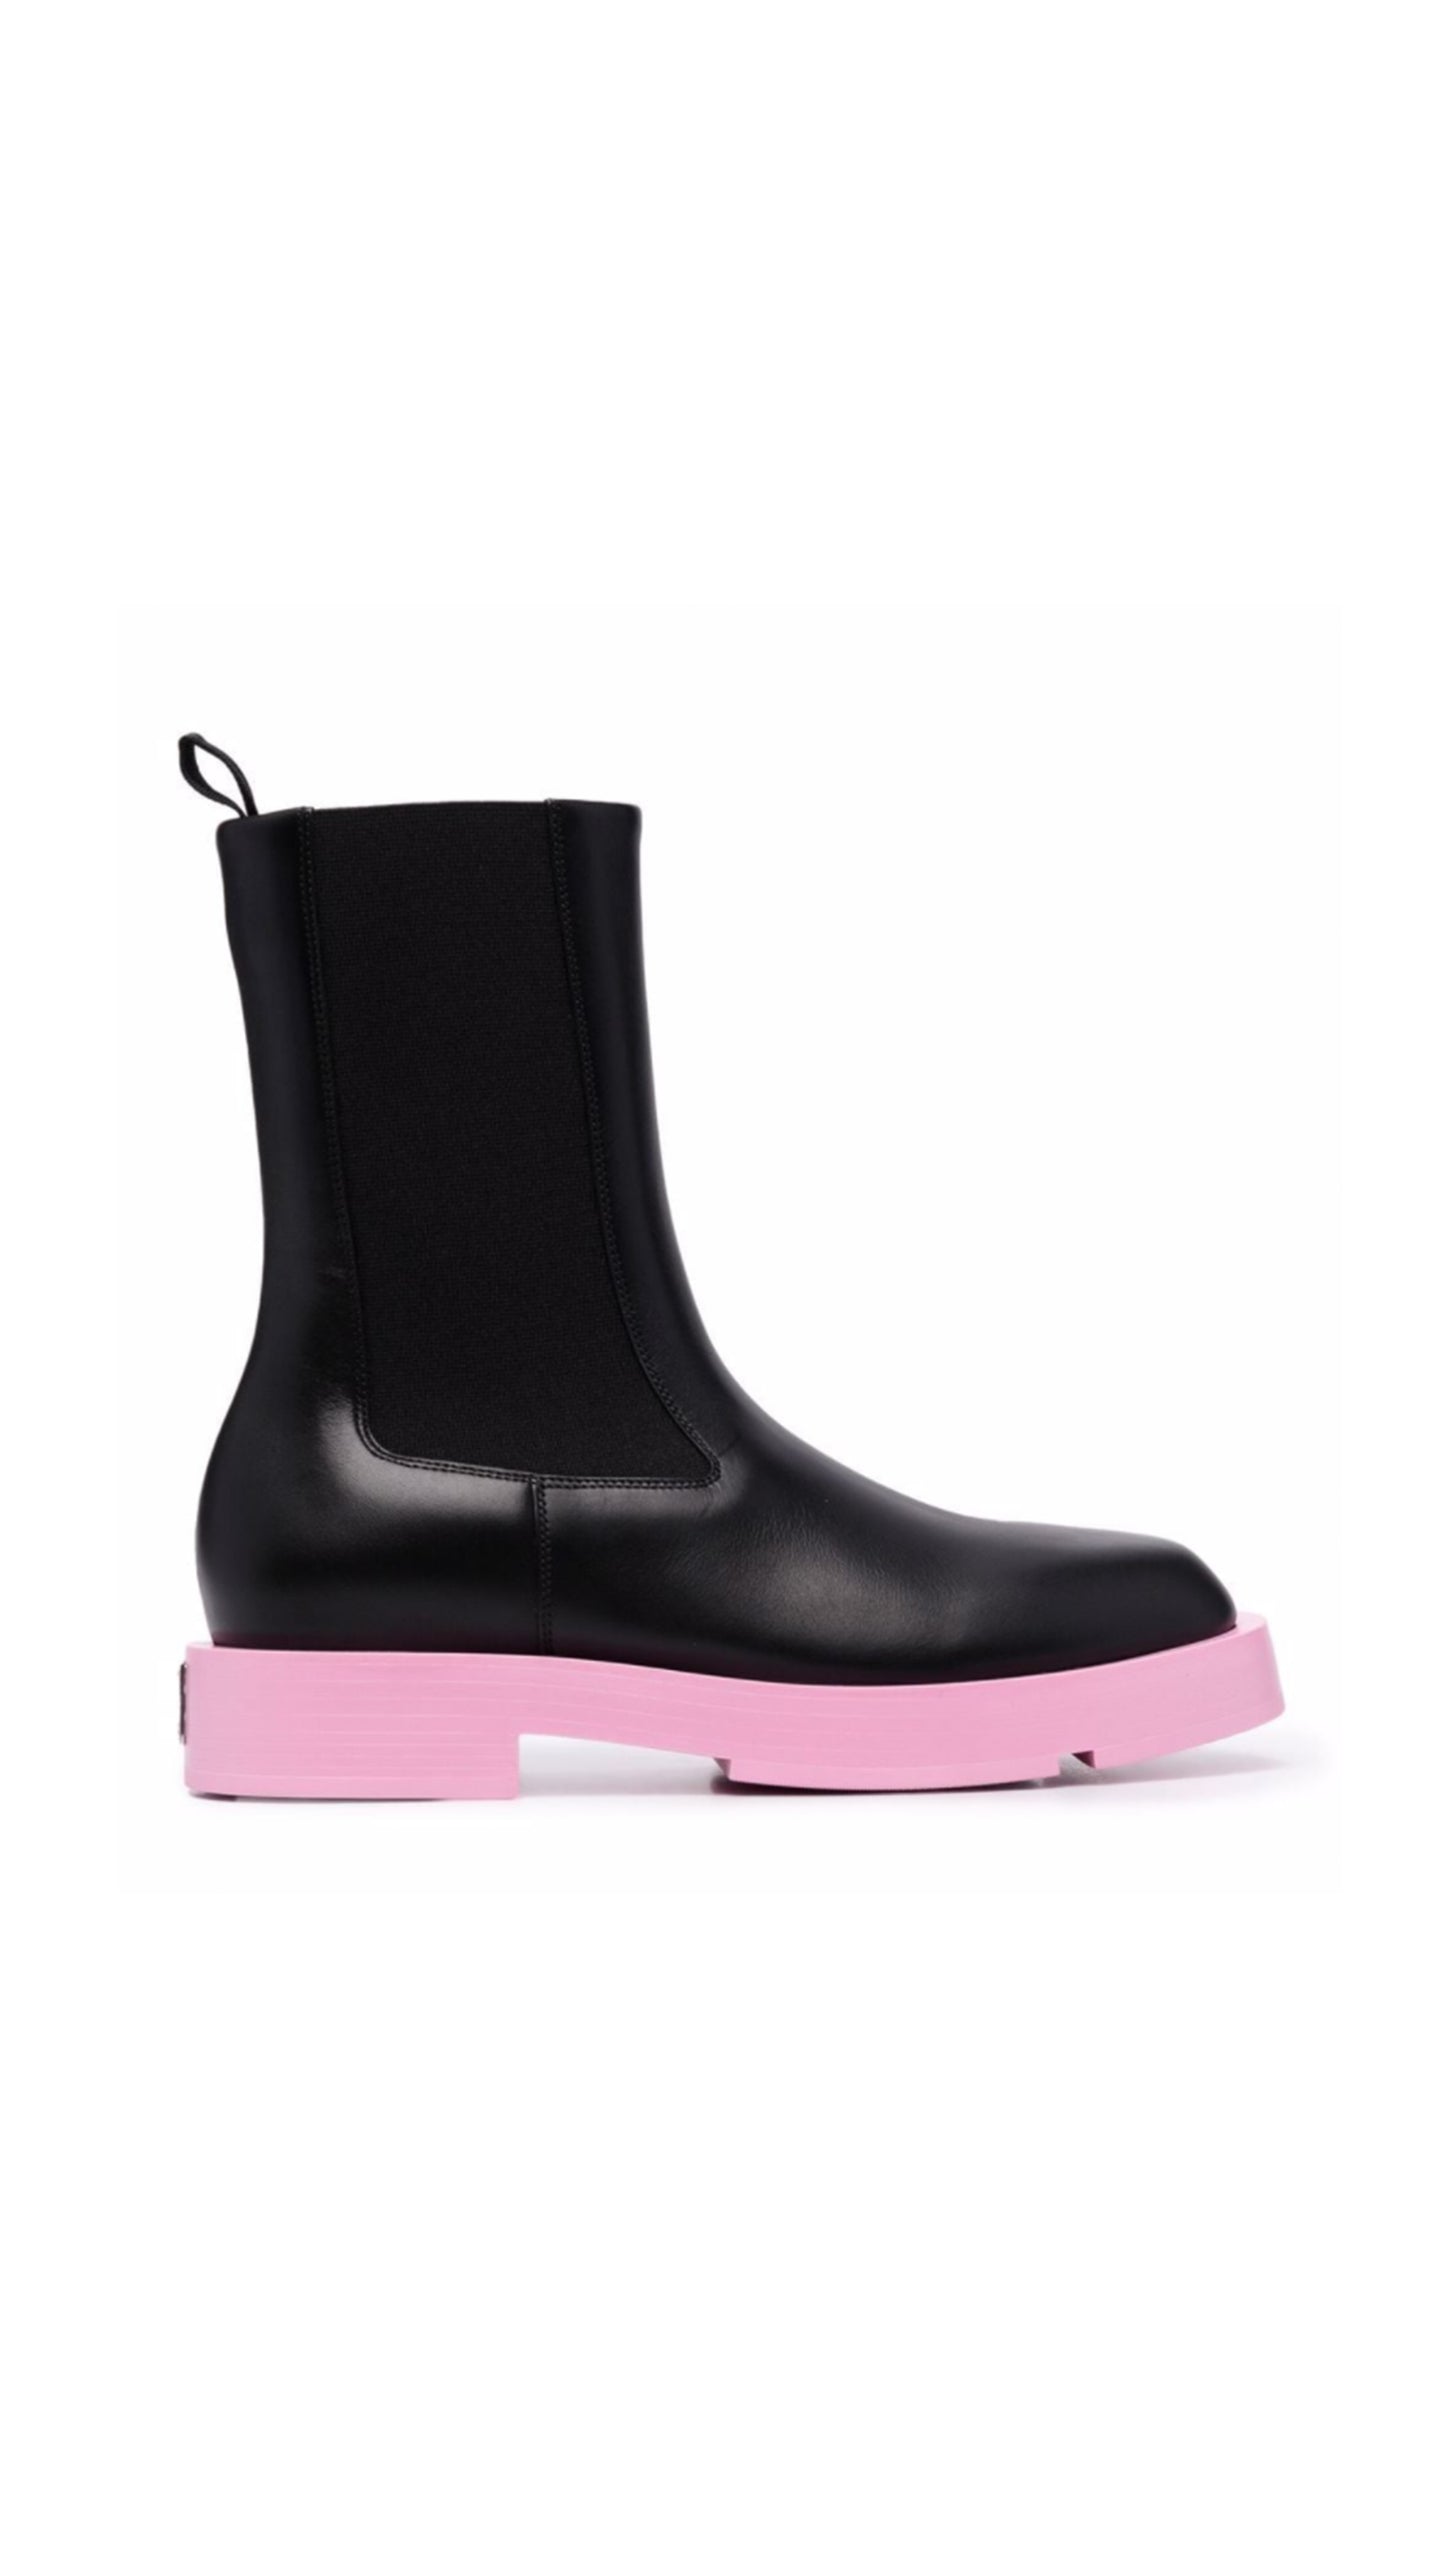 Colourblock Leather Chelsea Boots - Black / Pink